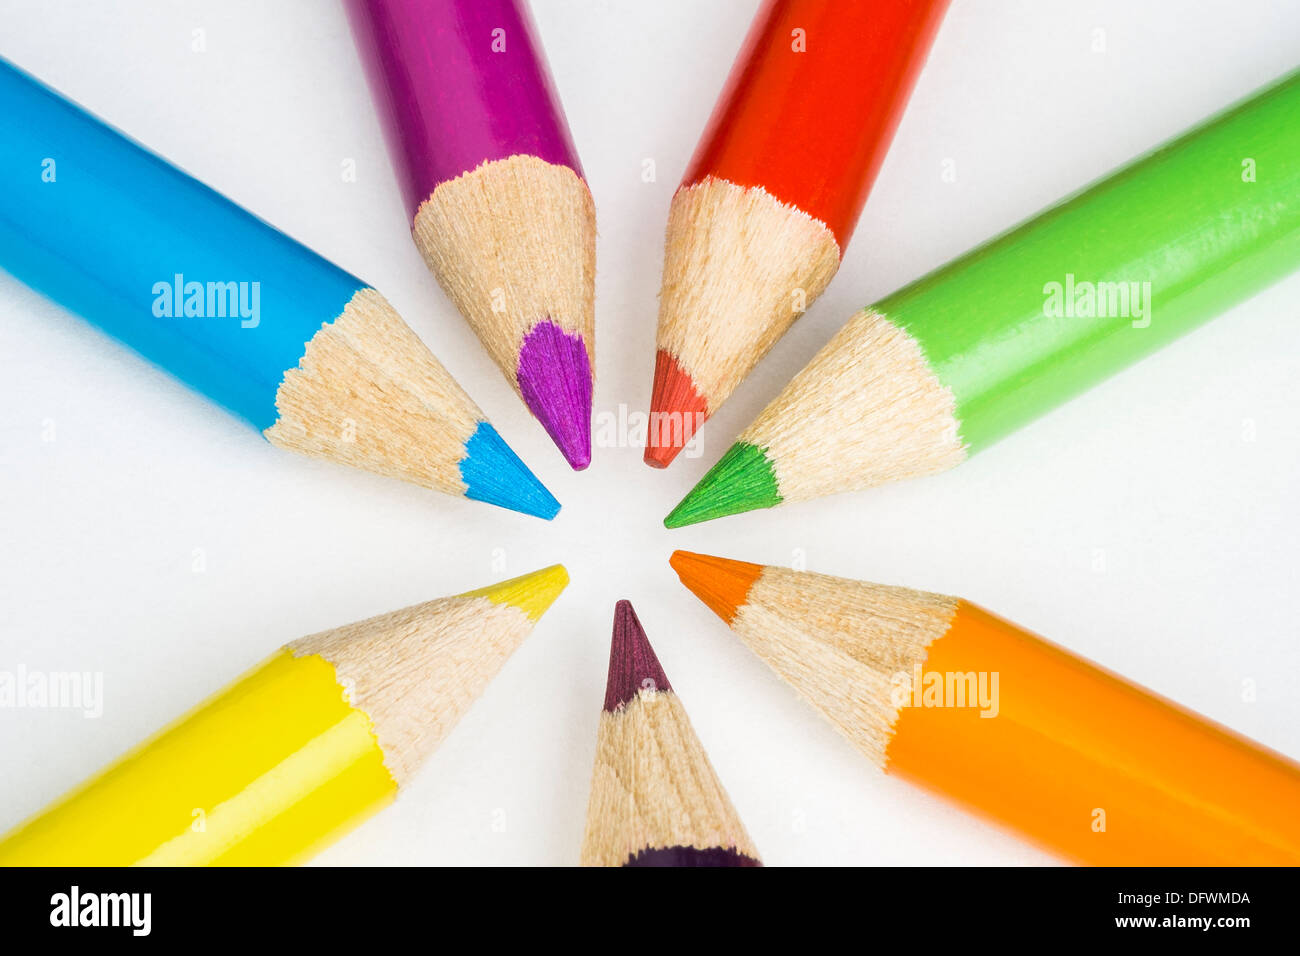 Colored pencils with tips pointing inward Stock Photo